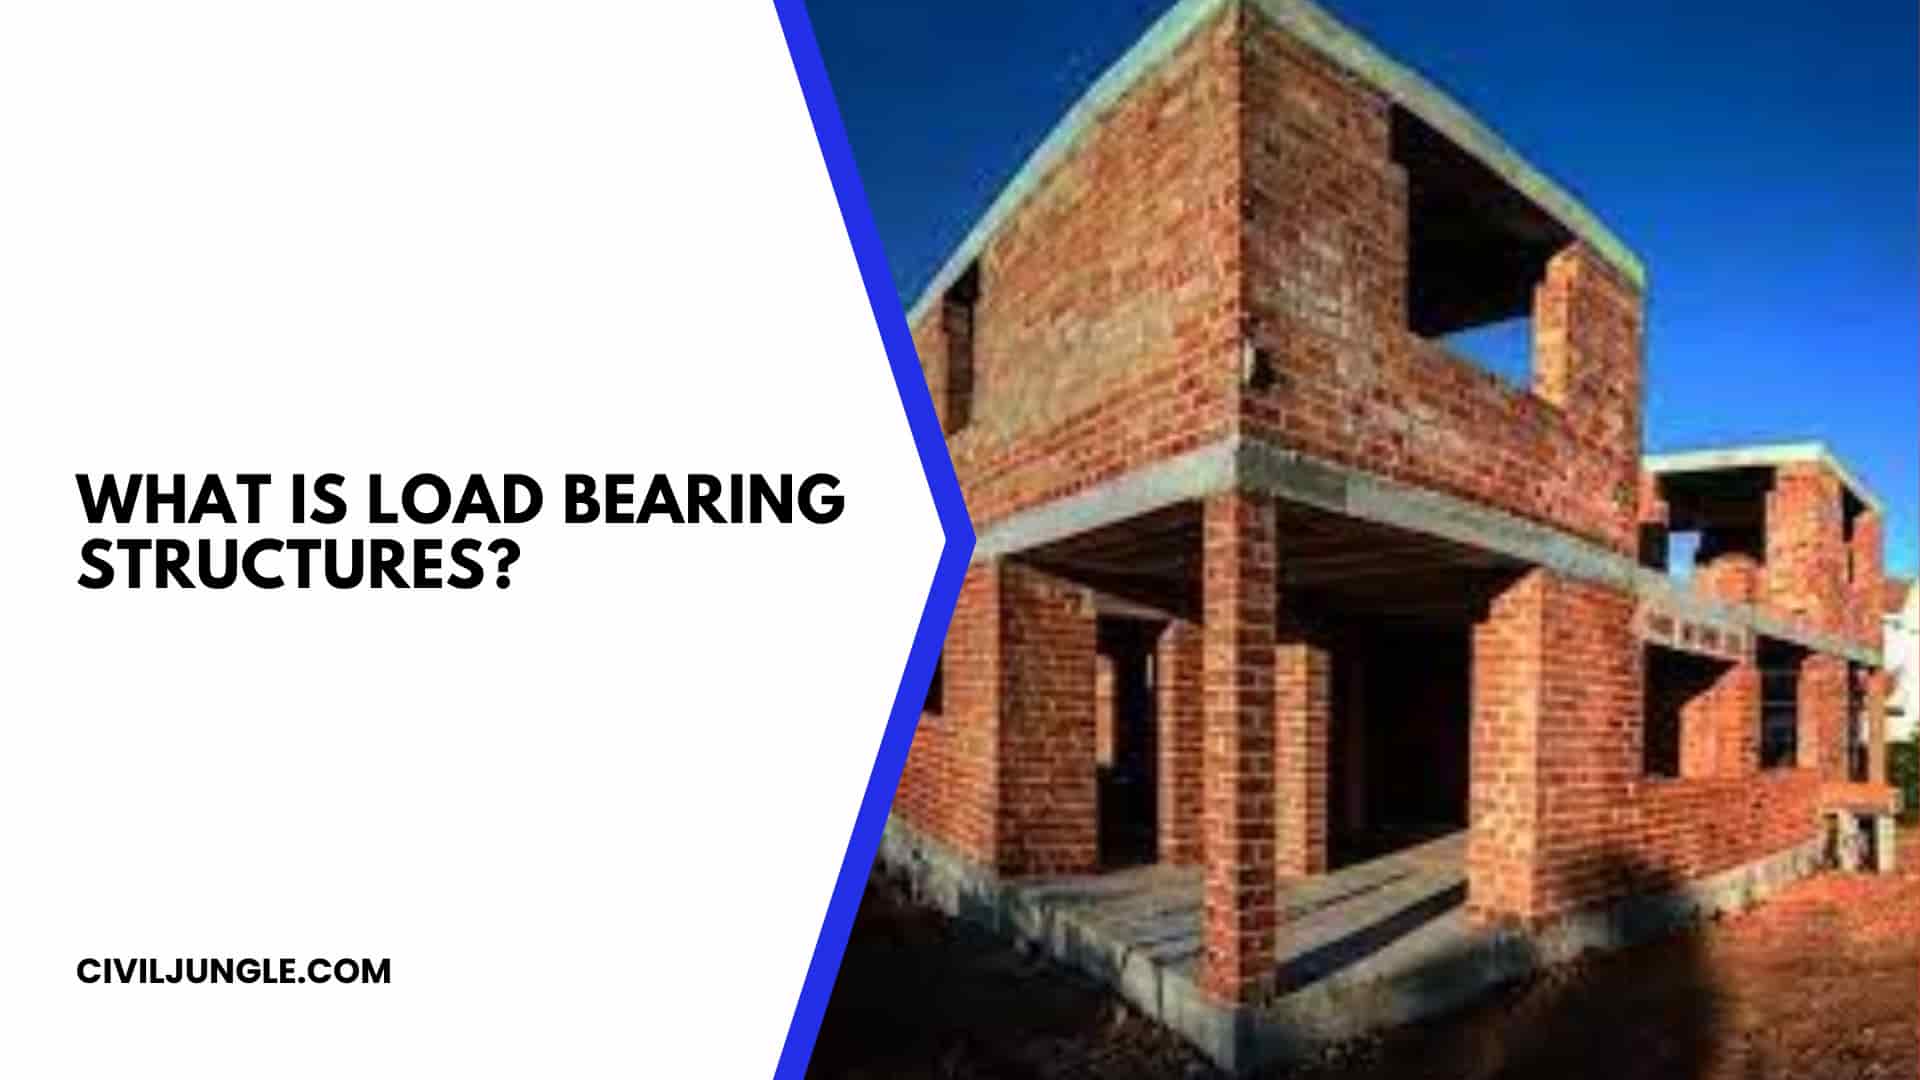 What Is Load Bearing Structures?